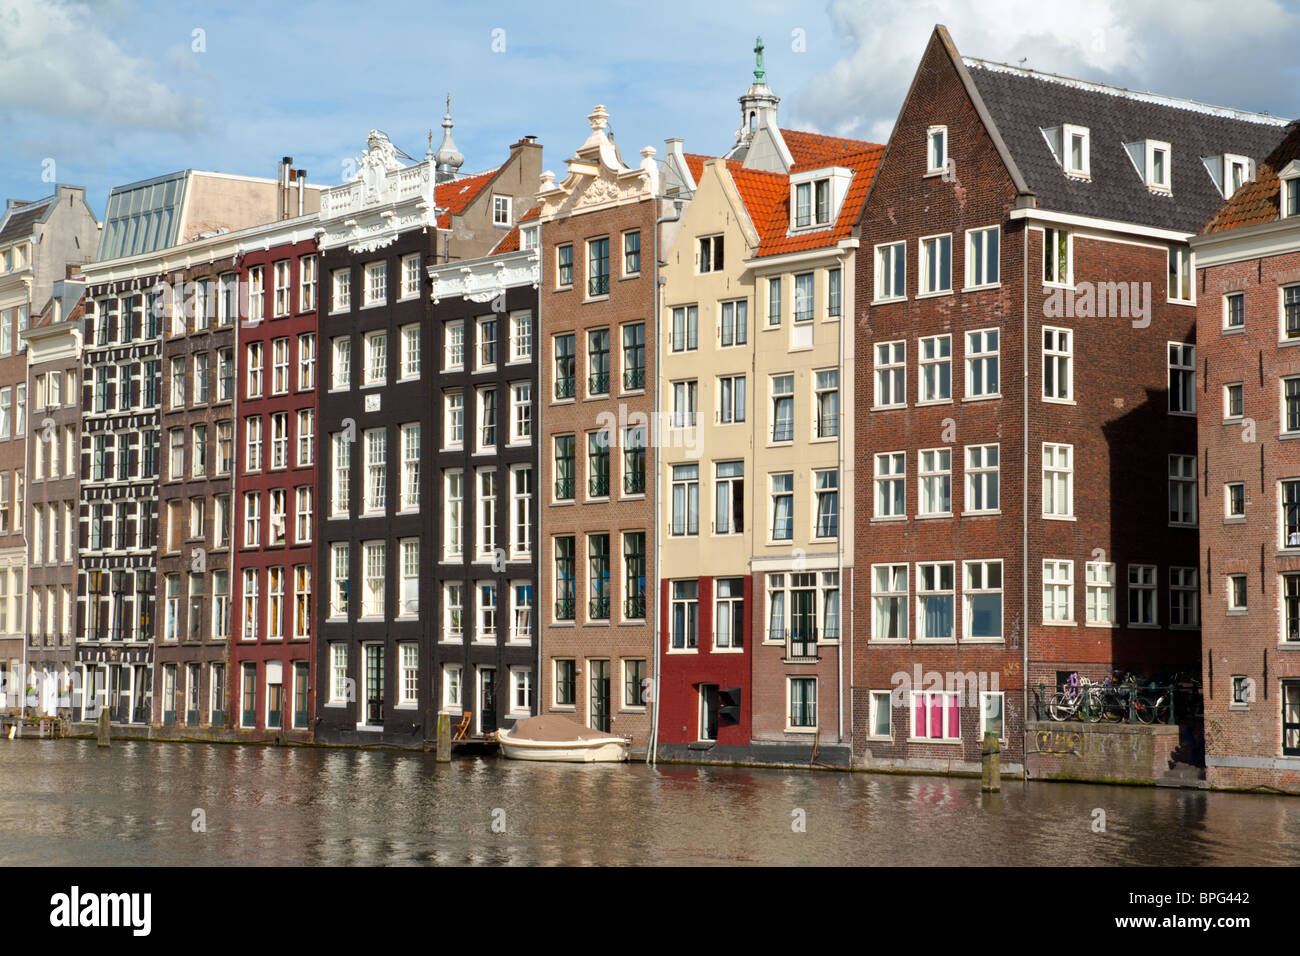 Old 17th and 18th century brick houses along a canal in Amsterdam, Holland. Stock Photo